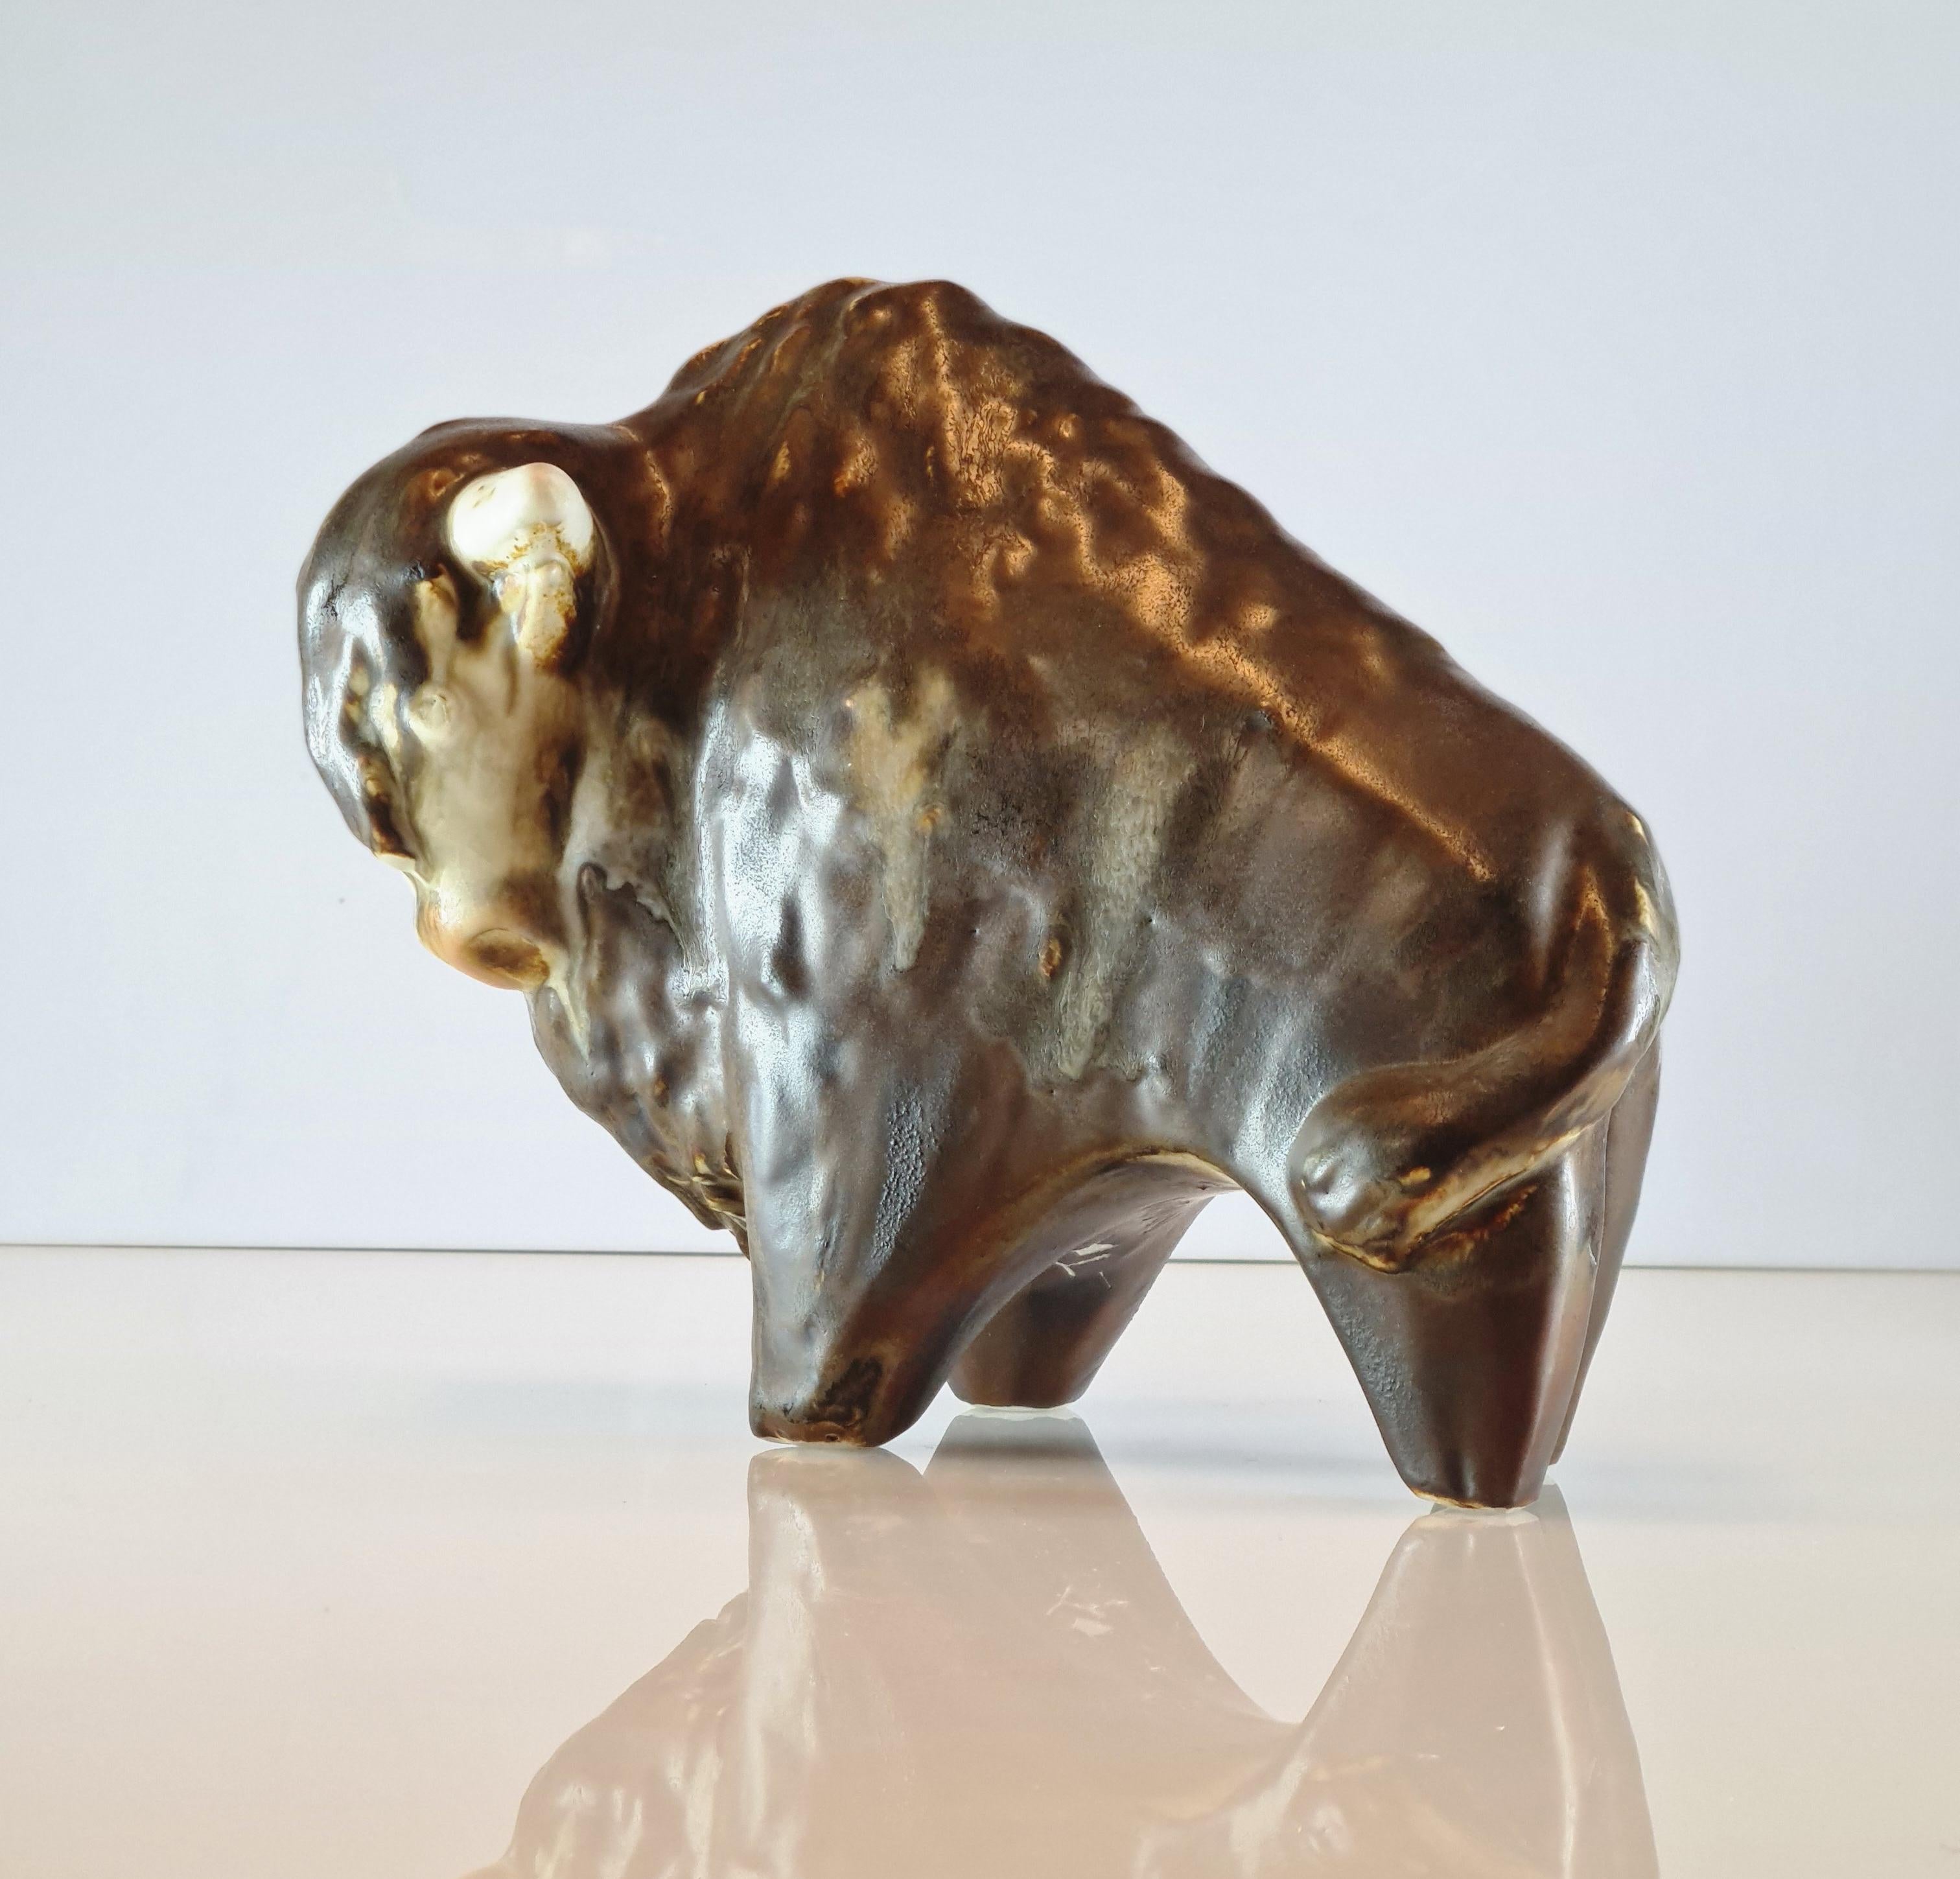 A beautiful and large ceramic bison figurine by the renowned Finnish ceramic artist and designer Taisto Kaasinen for Arabia. The figurine is signed TK and Arabia and is in a beautiful condition.

Not only a collector´s item for ceramic or figurine